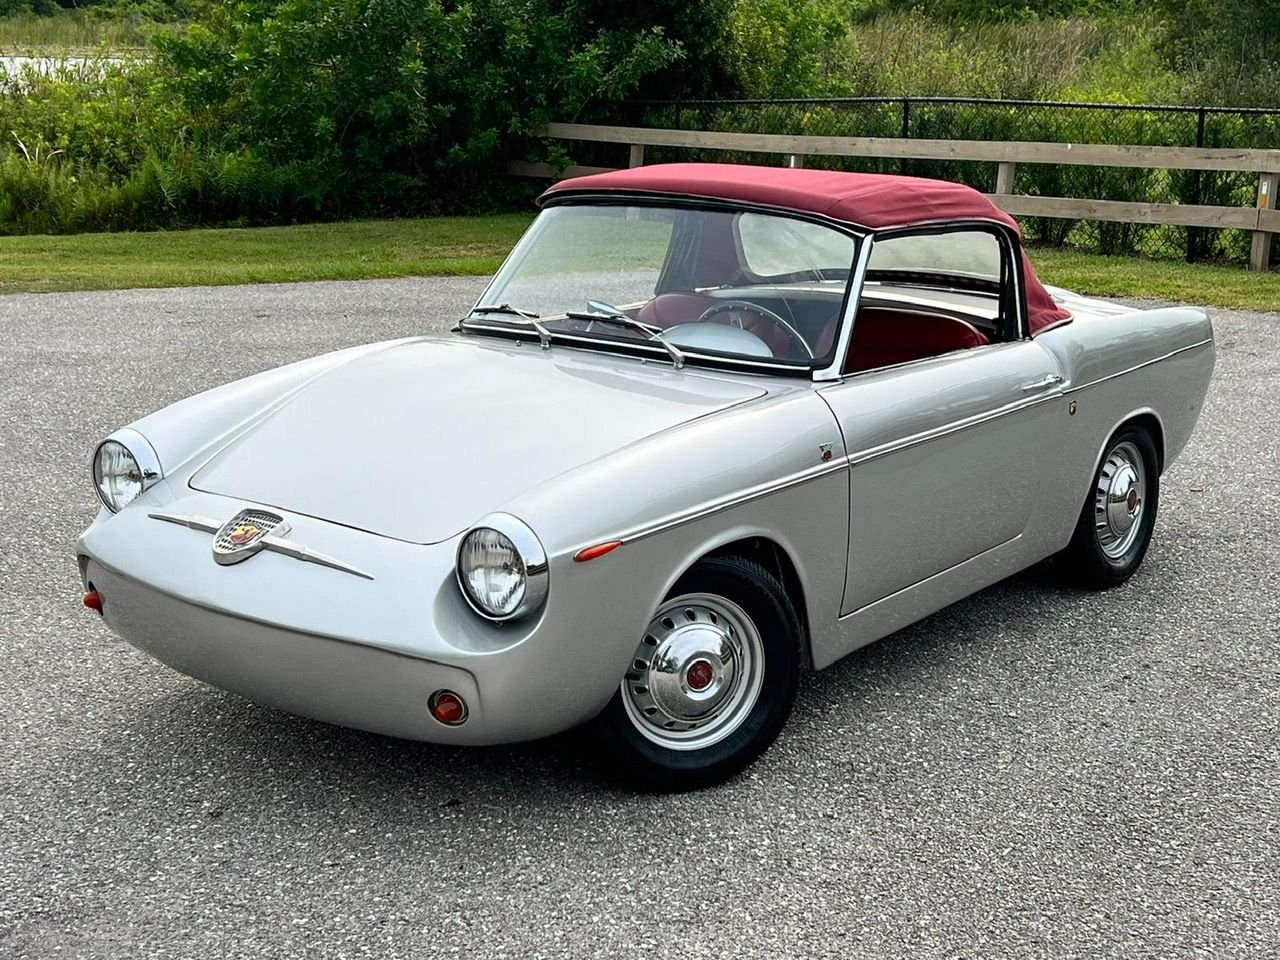 For Sale 1959 Fiat Abarth 750 Spyder GT